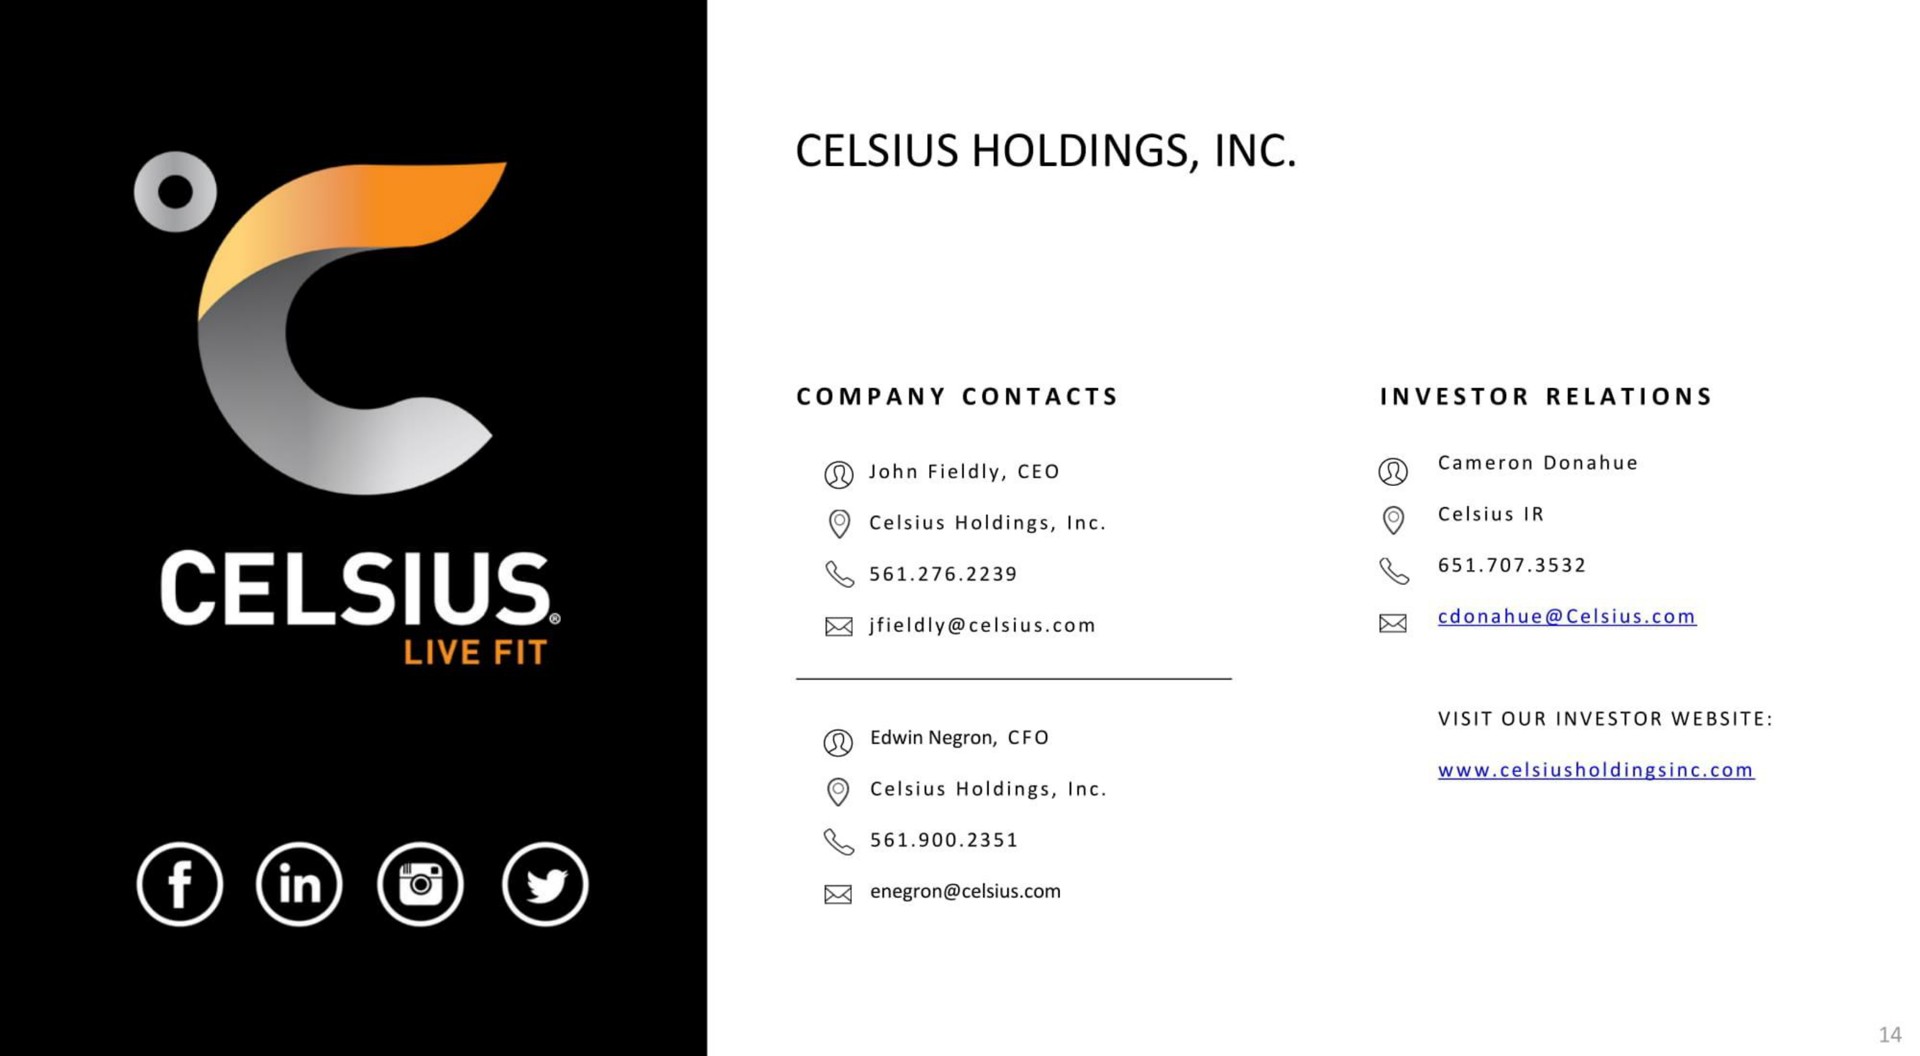 holdings | Celsius Holdings